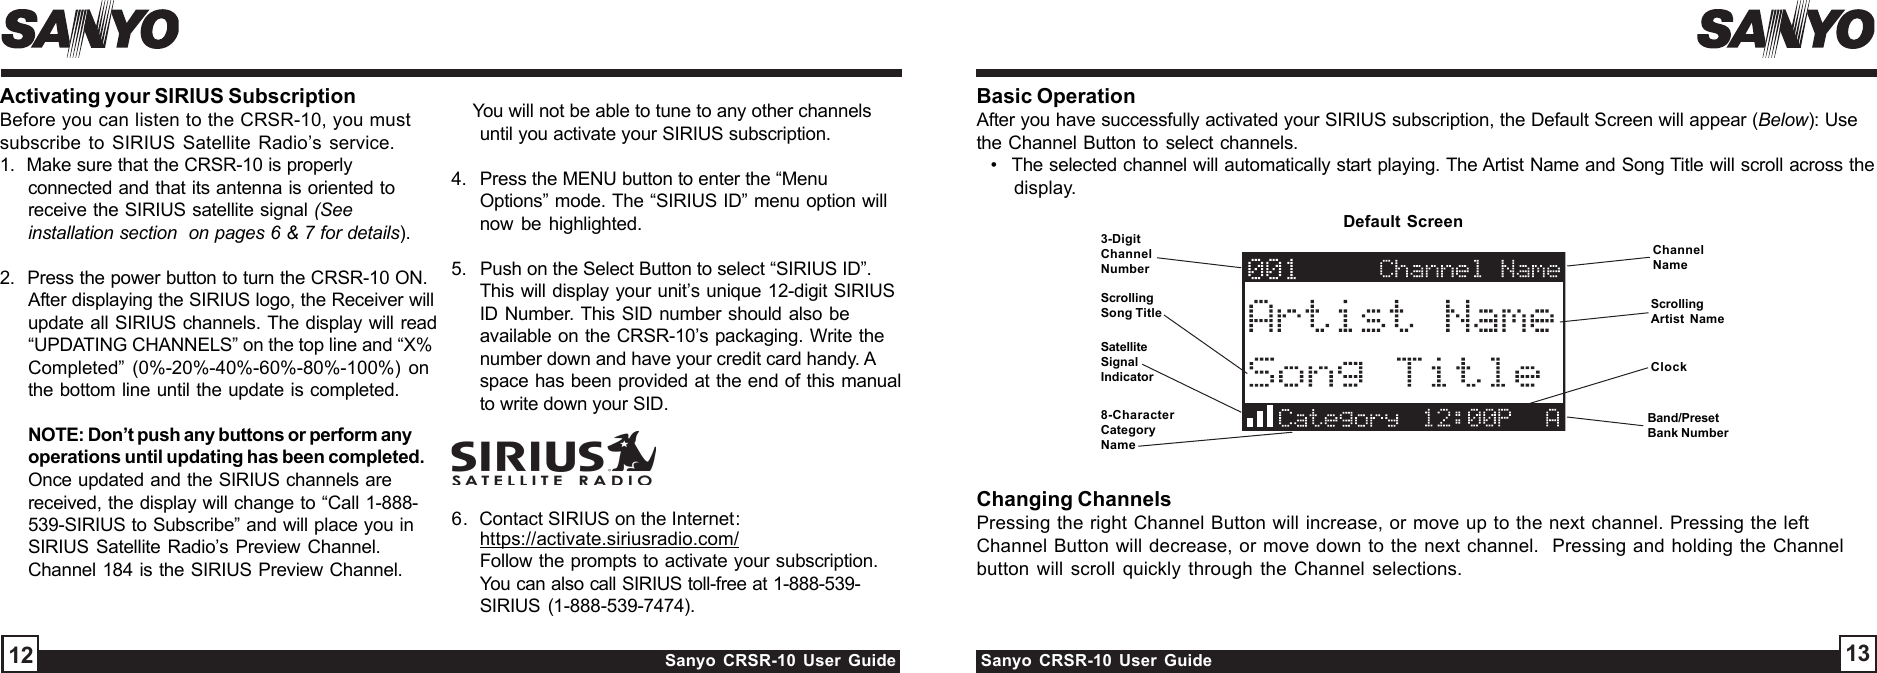 Sanyo CRSR-10 User Guide Sanyo CRSR-10 User Guide 1312Changing ChannelsPressing the right Channel Button will increase, or move up to the next channel. Pressing the leftChannel Button will decrease, or move down to the next channel.  Pressing and holding the Channelbutton will scroll quickly through the Channel selections.ChannelNameScrollingArtist NameClockBand/PresetBank NumberDefault Screen3-DigitChannelNumberScrollingSong Title8-CharacterCategoryName6.  Contact SIRIUS on the Internet:https://activate.siriusradio.com/Follow the prompts to activate your subscription.You can also call SIRIUS toll-free at 1-888-539-SIRIUS (1-888-539-7474).    You will not be able to tune to any other channelsuntil you activate your SIRIUS subscription.4.   Press the MENU button to enter the “MenuOptions” mode. The “SIRIUS ID” menu option willnow be highlighted.5.   Push on the Select Button to select “SIRIUS ID”.This will display your unit’s unique 12-digit SIRIUSID Number. This SID number should also beavailable on the CRSR-10’s packaging. Write thenumber down and have your credit card handy. Aspace has been provided at the end of this manualto write down your SID.Activating your SIRIUS SubscriptionBefore you can listen to the CRSR-10, you mustsubscribe to SIRIUS Satellite Radio’s service.1.  Make sure that the CRSR-10 is properlyconnected and that its antenna is oriented toreceive the SIRIUS satellite signal (Seeinstallation section  on pages 6 &amp; 7 for details).2.  Press the power button to turn the CRSR-10 ON.After displaying the SIRIUS logo, the Receiver willupdate all SIRIUS channels. The display will read“UPDATING CHANNELS” on the top line and “X%Completed” (0%-20%-40%-60%-80%-100%) onthe bottom line until the update is completed.NOTE: Don’t push any buttons or perform anyoperations until updating has been completed.Once updated and the SIRIUS channels arereceived, the display will change to “Call 1-888-539-SIRIUS to Subscribe” and will place you inSIRIUS Satellite Radio’s Preview Channel.Channel 184 is the SIRIUS Preview Channel.Basic OperationAfter you have successfully activated your SIRIUS subscription, the Default Screen will appear (Below): Usethe Channel Button to select channels.•   The selected channel will automatically start playing. The Artist Name and Song Title will scroll across thedisplay.SatelliteSignalIndicator